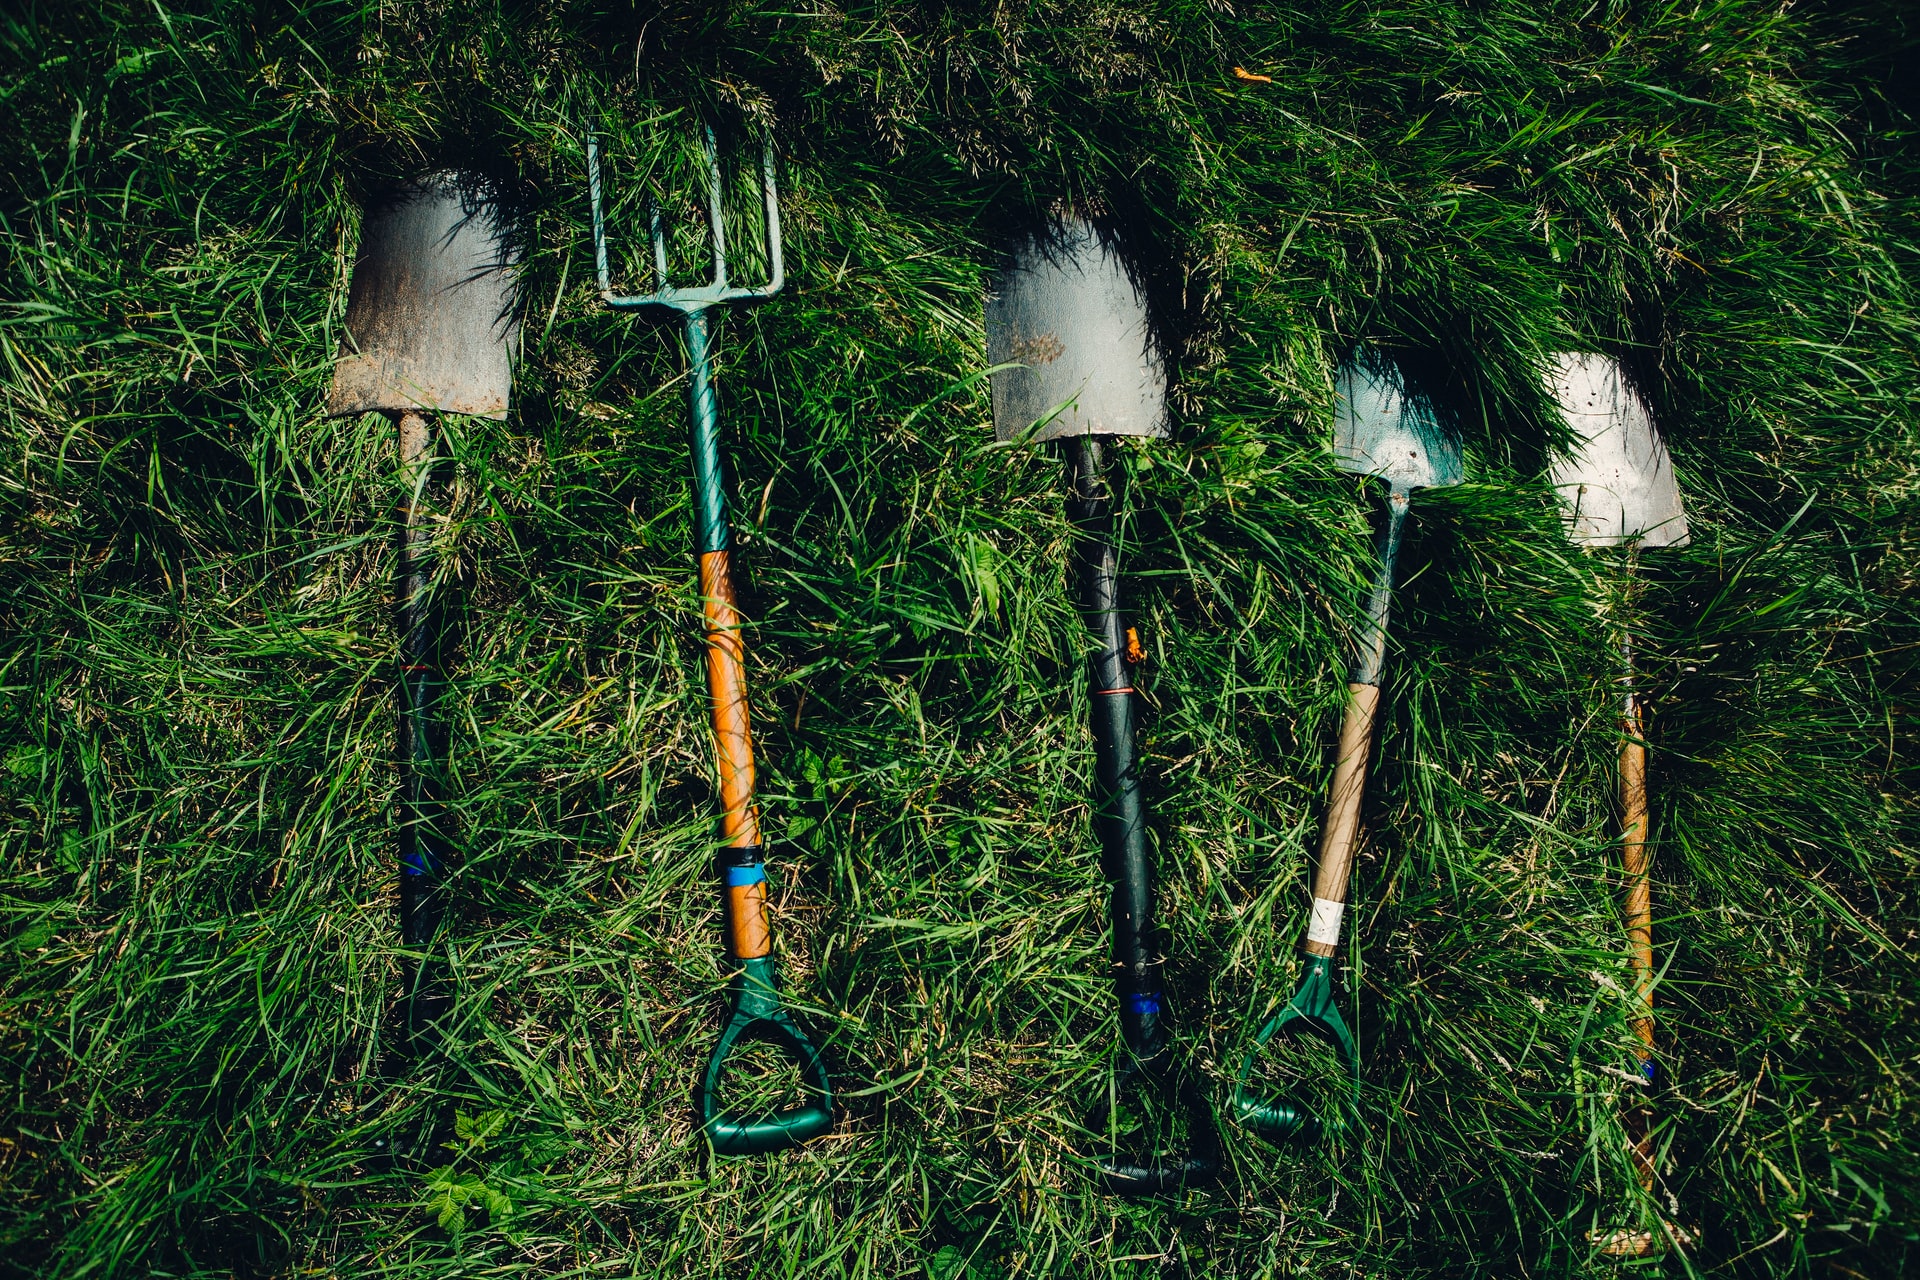 Gardening tools. We suggest which ones are worth having